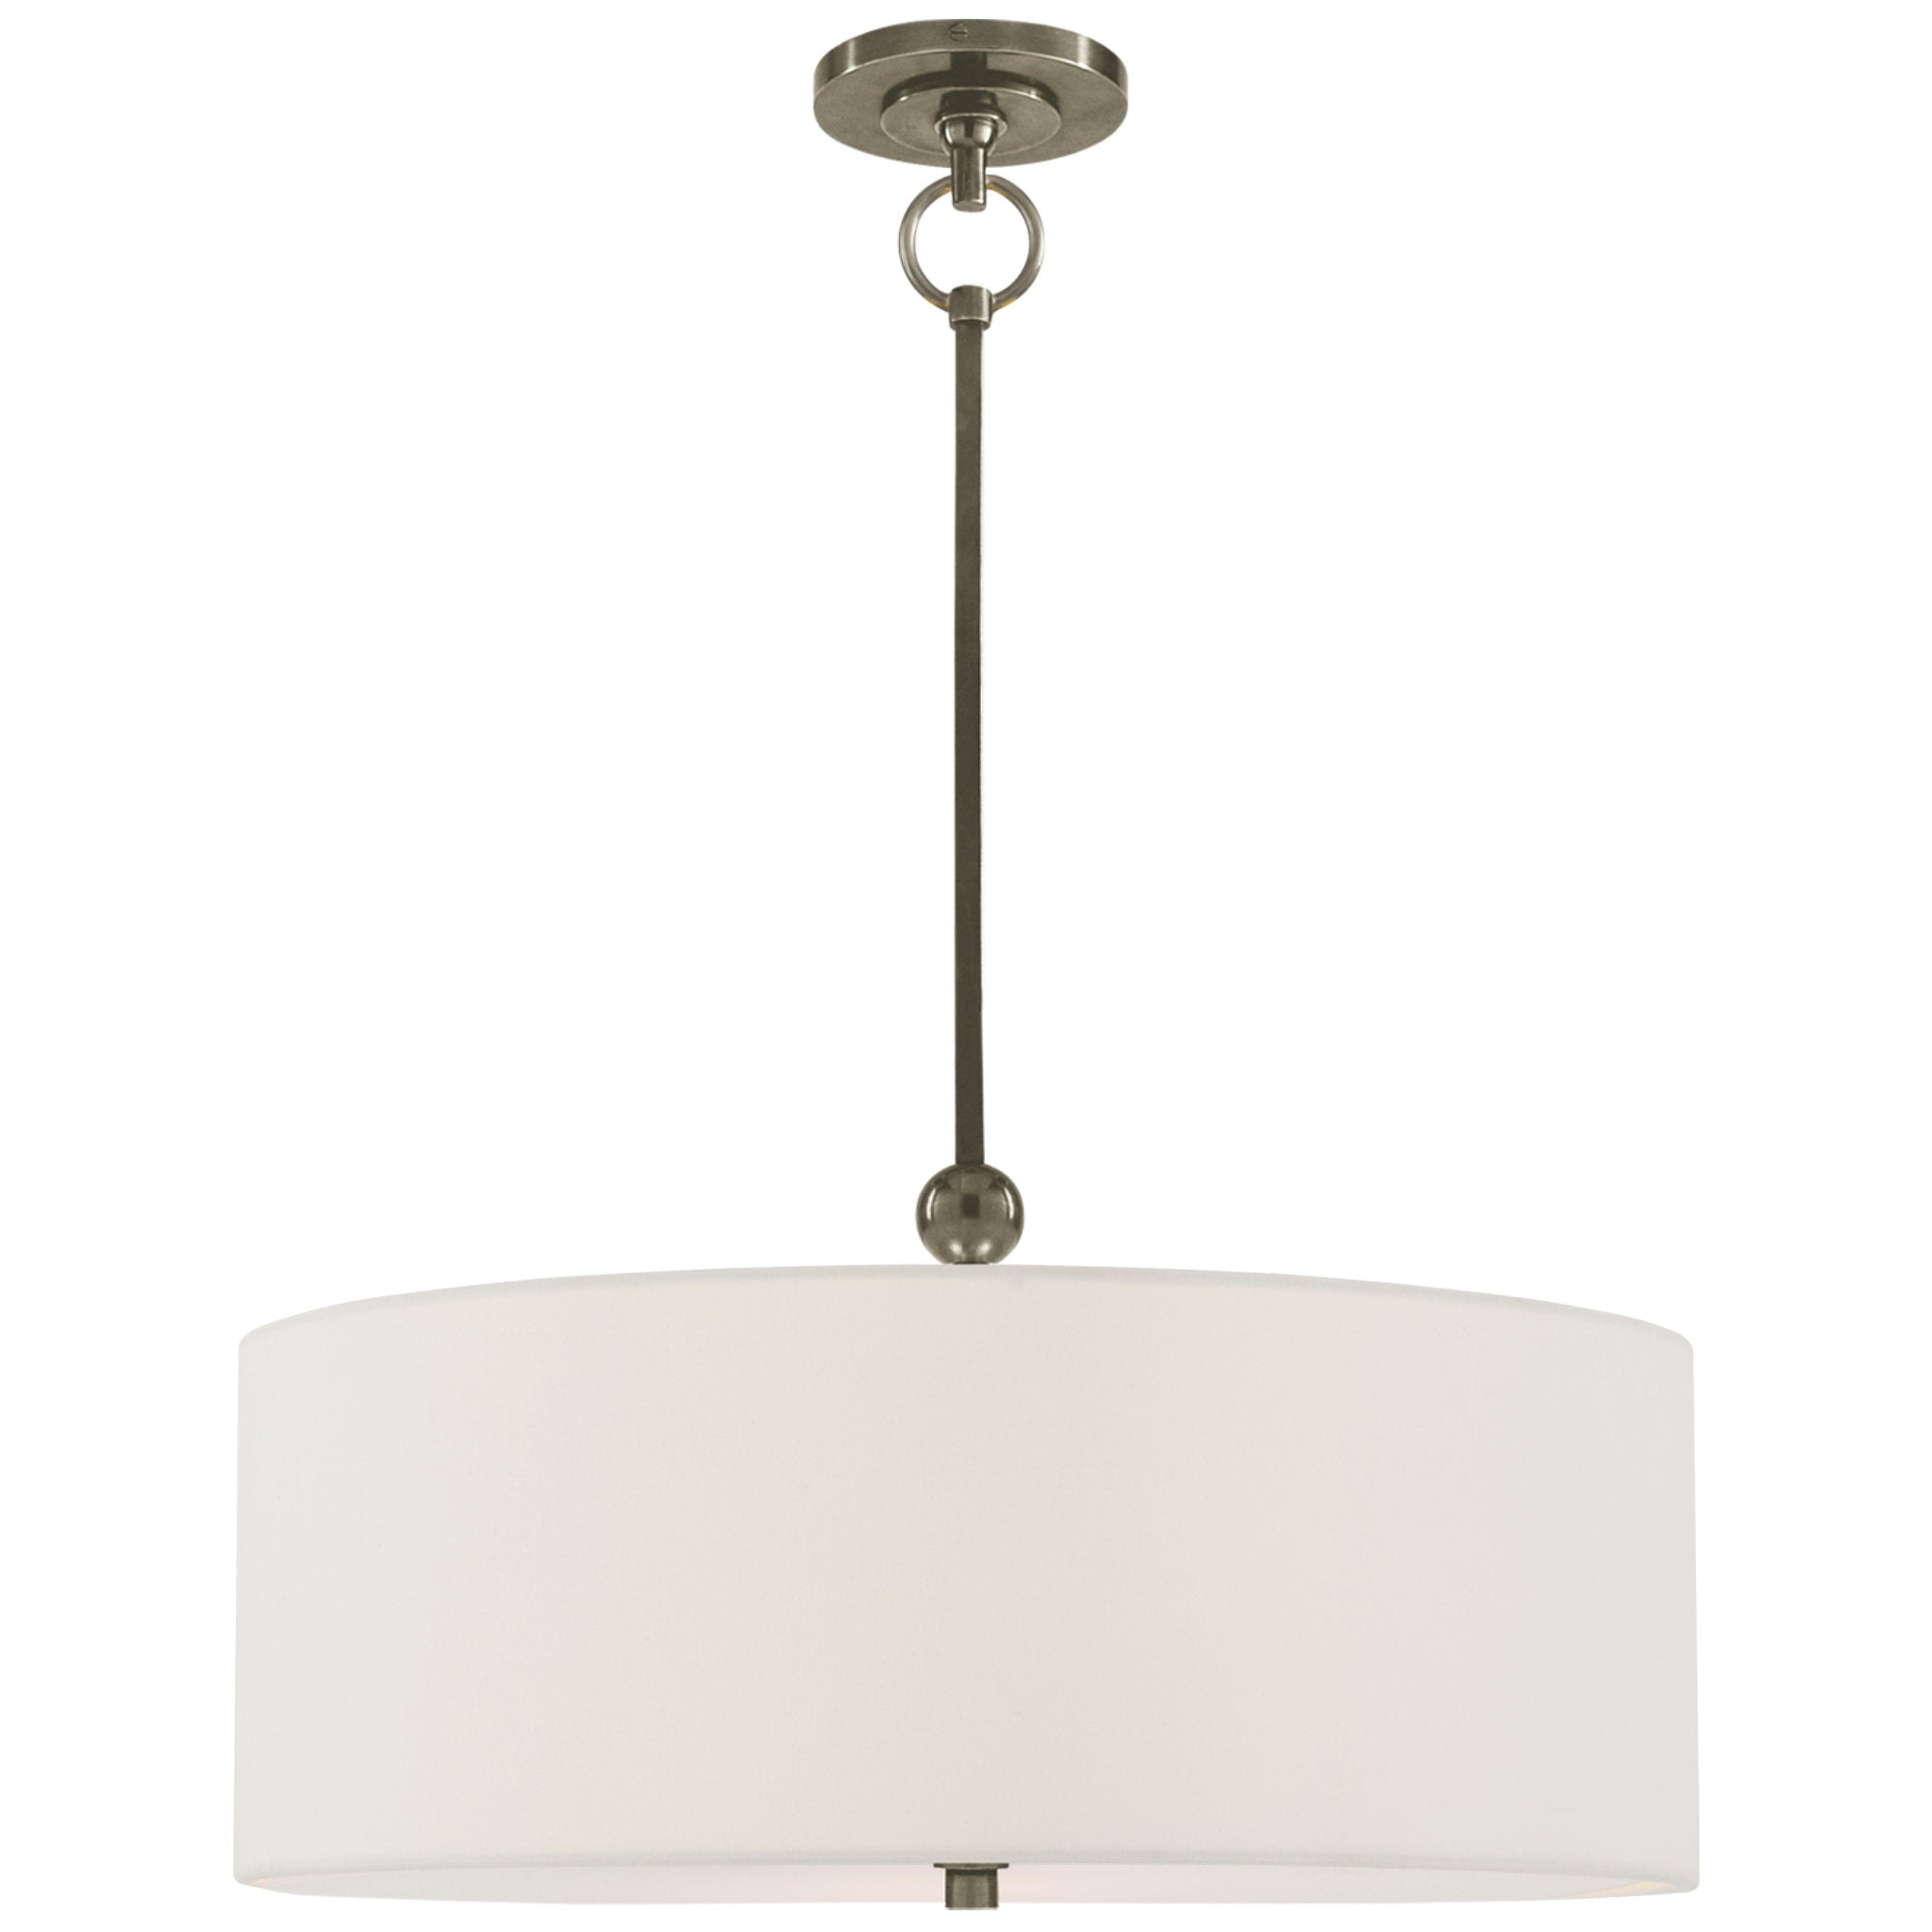 Thomas O'Brien Reed Hanging Shade in Antique Nickel with Linen Shade